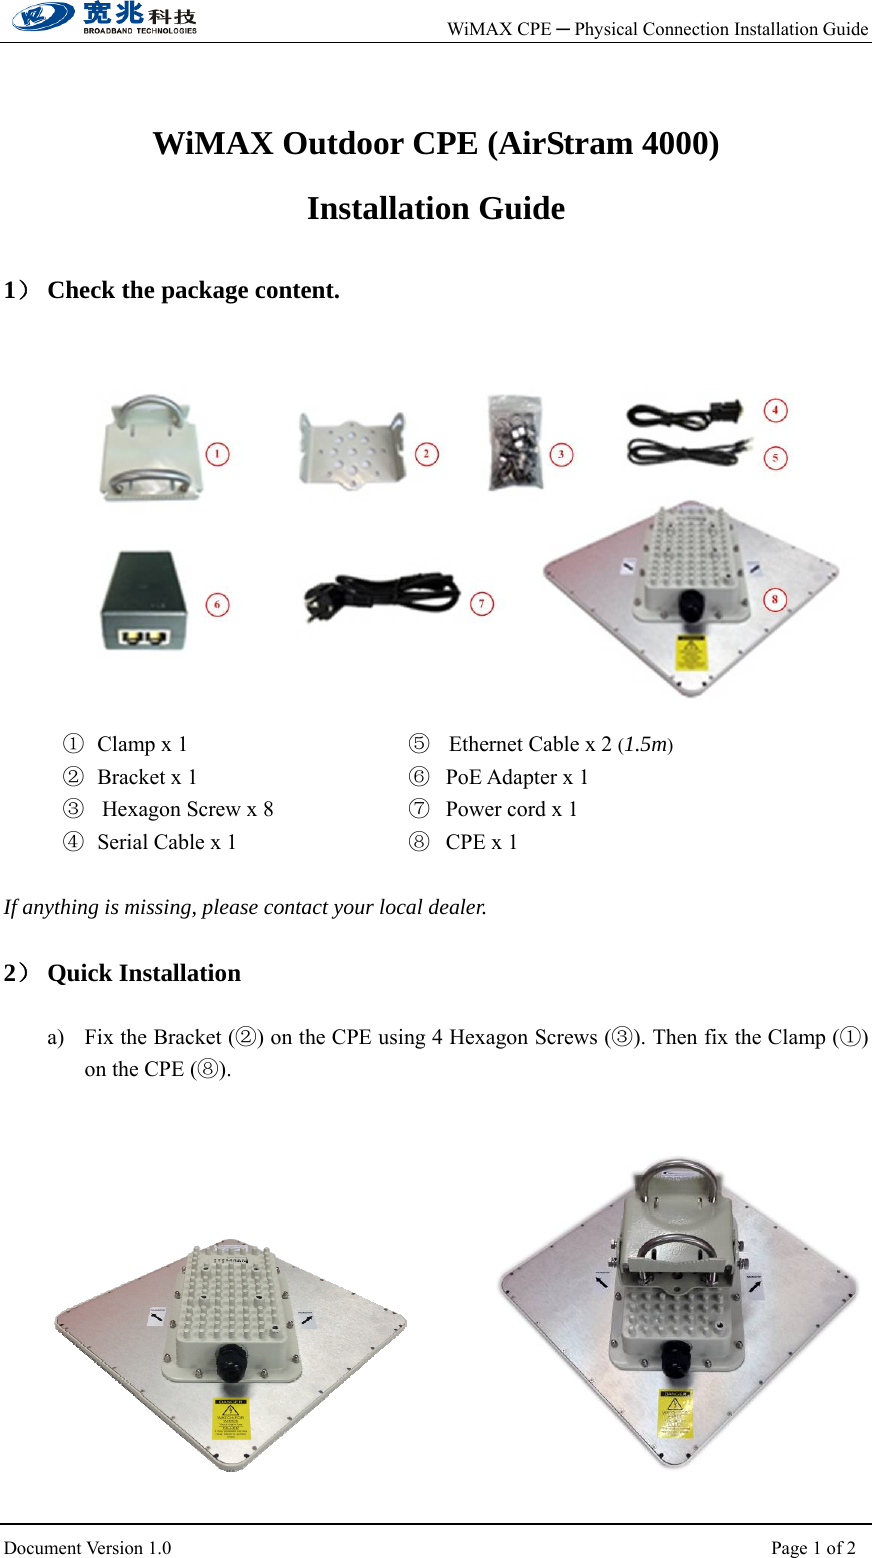    WiMAX CPE ─ Physical Connection Installation Guide                         Document Version 1.0                                                                  Page 1 of 2    WiMAX Outdoor CPE (AirStram 4000) Installation Guide  1） Check the package content.       ① Clamp x 1                            ② Bracket x 1                  ③  Hexagon Screw x 8                         ④ Serial Cable x 1      ⑤   Ethernet Cable x 2 (1.5m)                ⑥ PoE Adapter x 1                       ⑦ Power cord x 1 ⑧ CPE x 1  If anything is missing, please contact your local dealer.  2） Quick Installation  a) Fix the Bracket (②) on the CPE using 4 Hexagon Screws (③). Then fix the Clamp (①) on the CPE (⑧).              